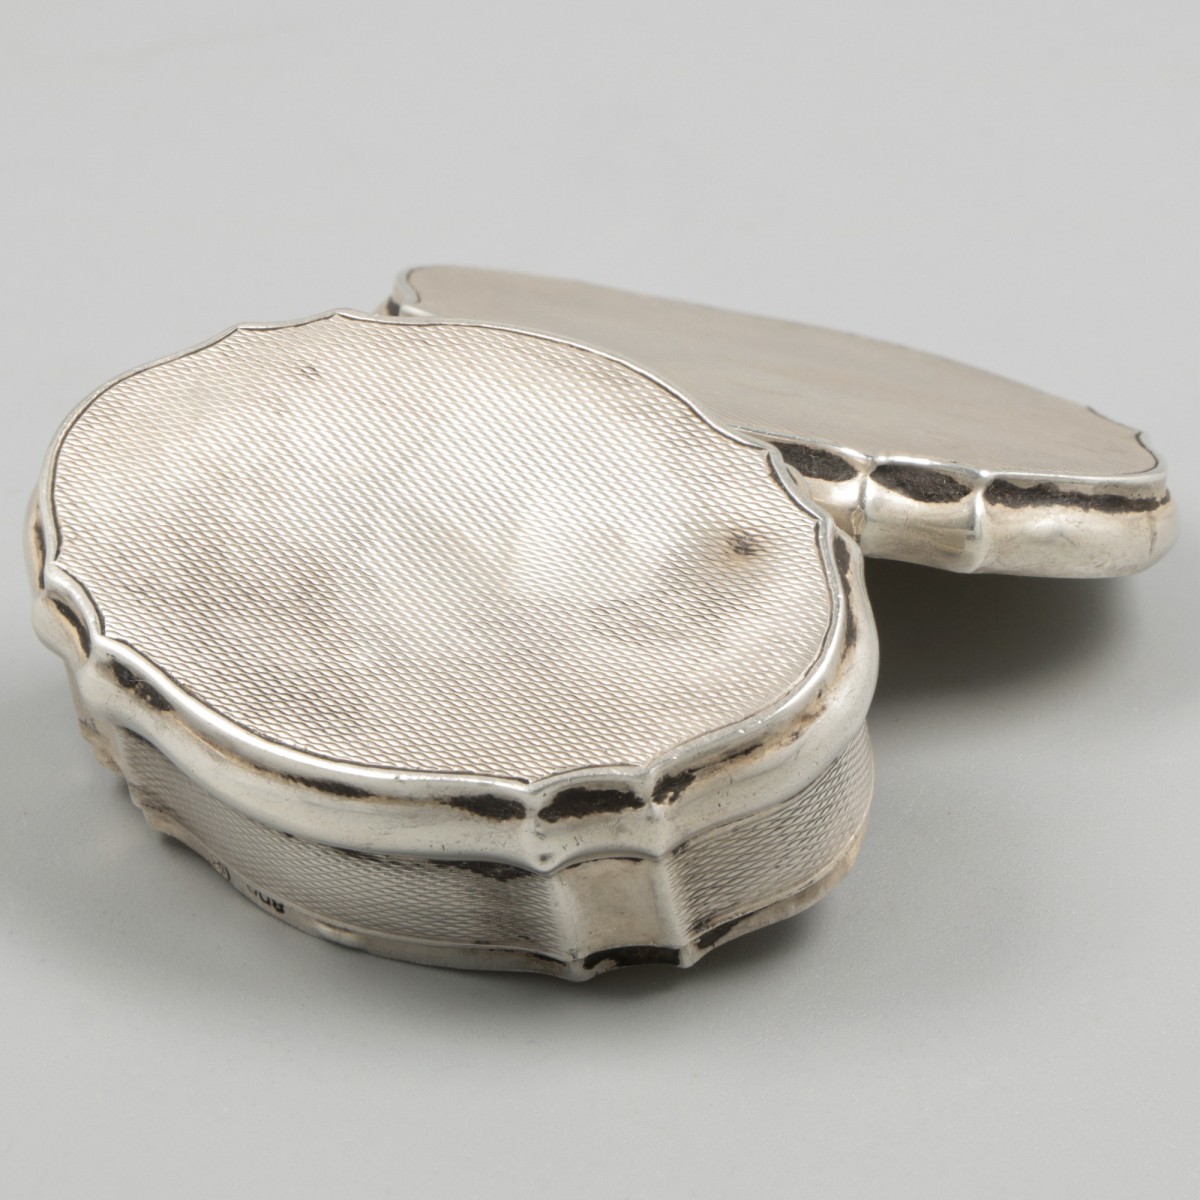 Peppermint / pill box silver. - Image 4 of 5